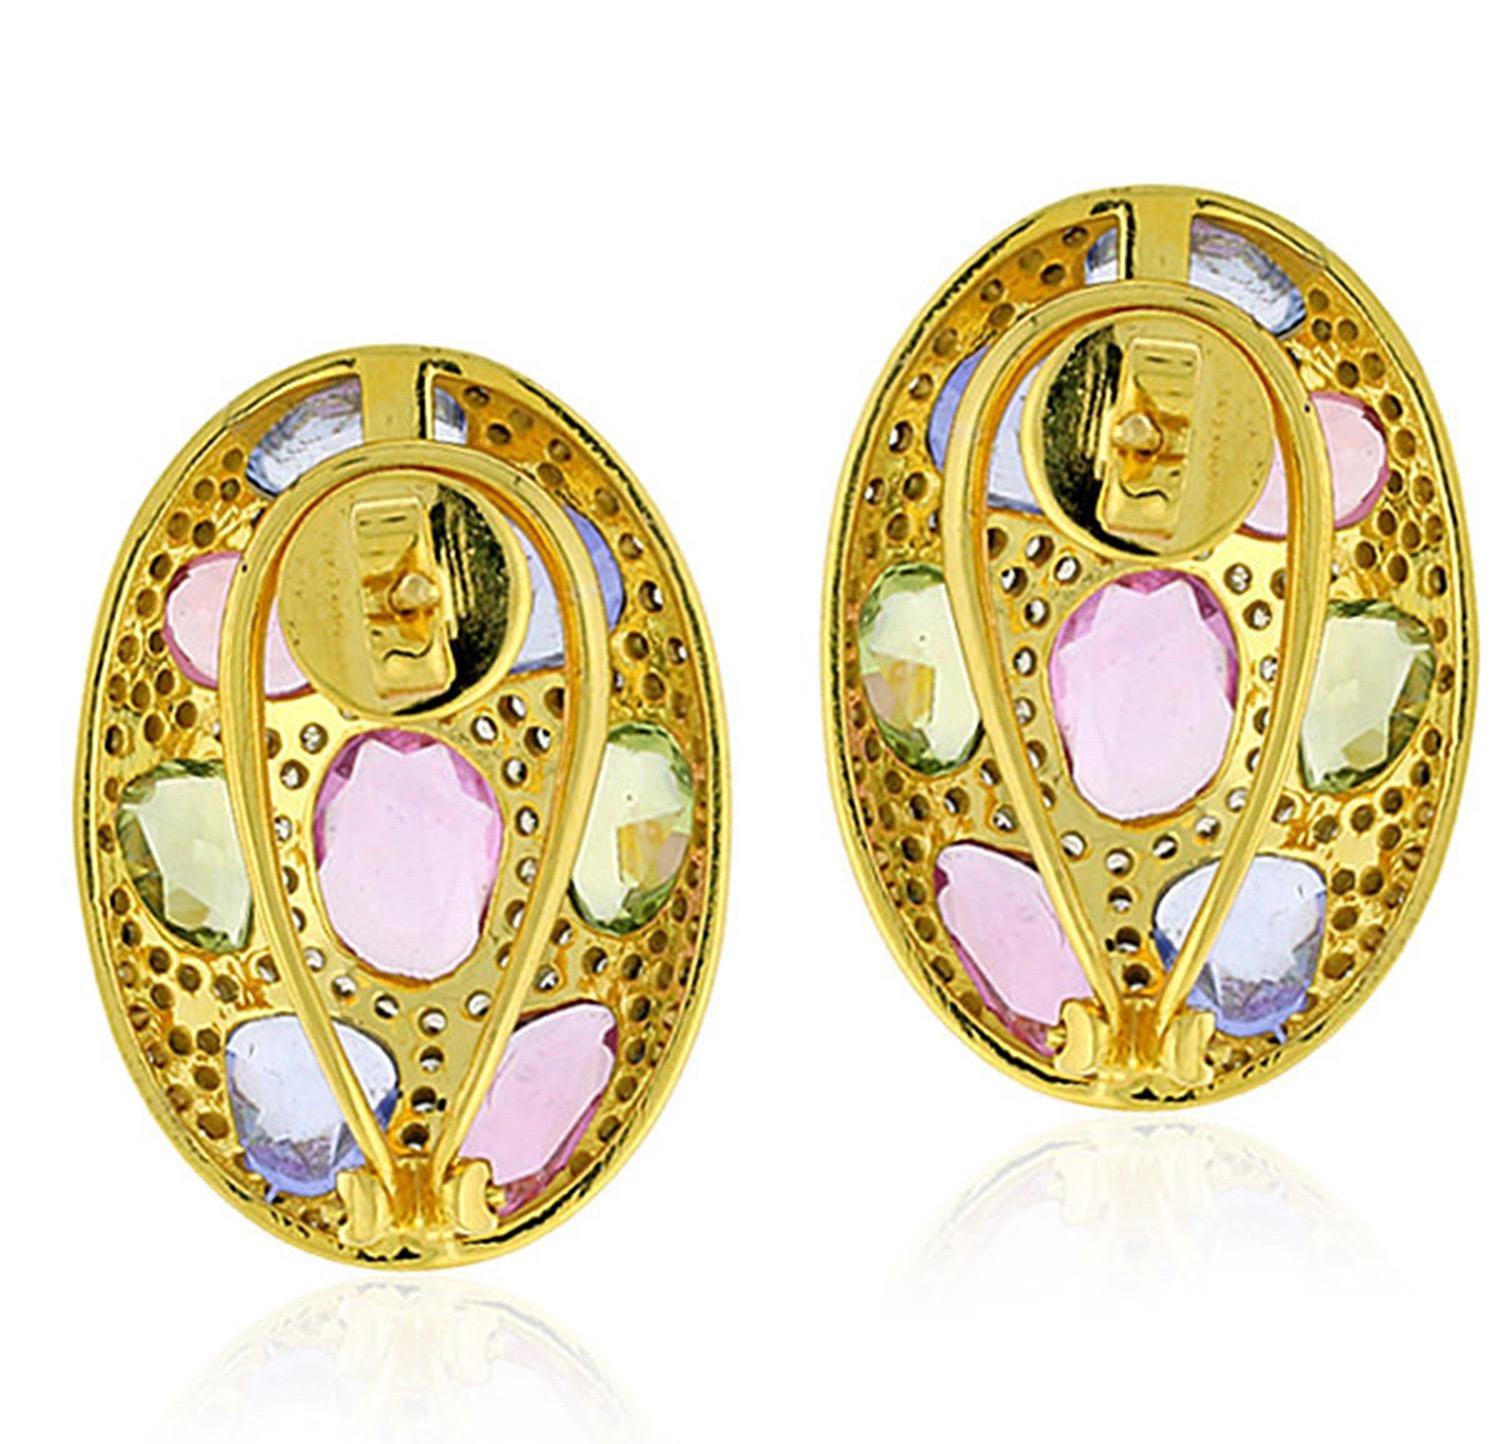 Cast from 14 karat gold, these stunning multi sapphire earrings are hand set with 1.79 carats of diamonds and 15.1 carats multi color sapphires with blackened finish.

FOLLOW  MEGHNA JEWELS storefront to view the latest collection & exclusive